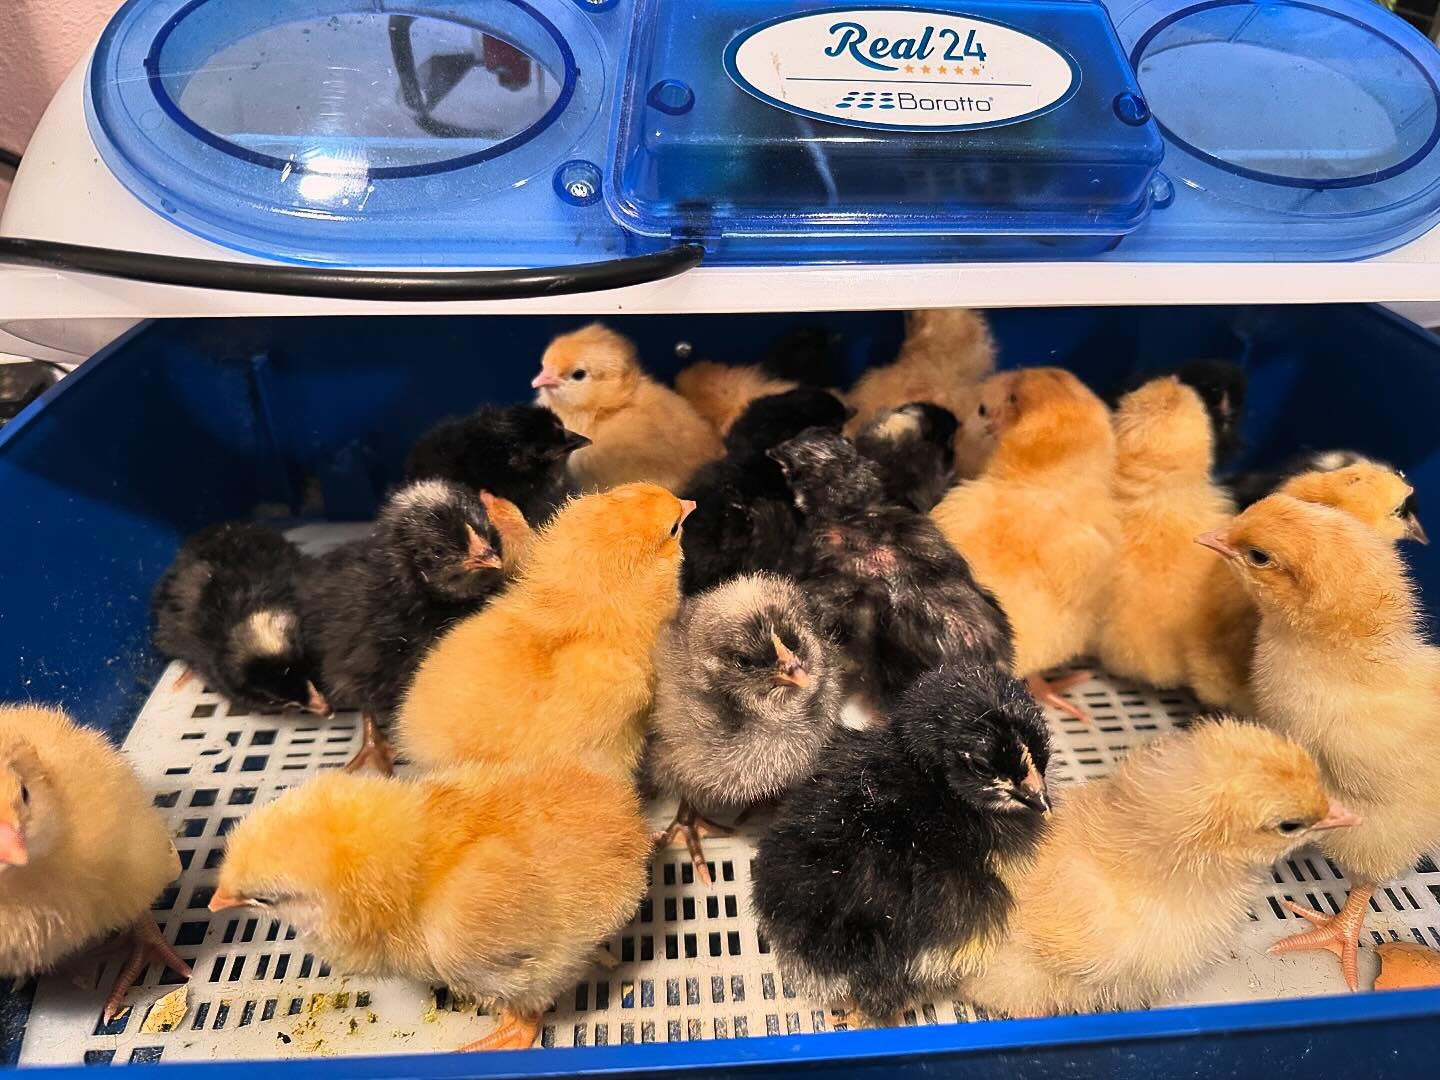 A new batch of chicks hatched from our incubators this week. An assortment of Buff Orpington, Cochin, Lavender orpington, Easter egger, Blue cuckoo maran, and barred rock mix are fluffy and ready for the world. If you are in the market for a baby chi